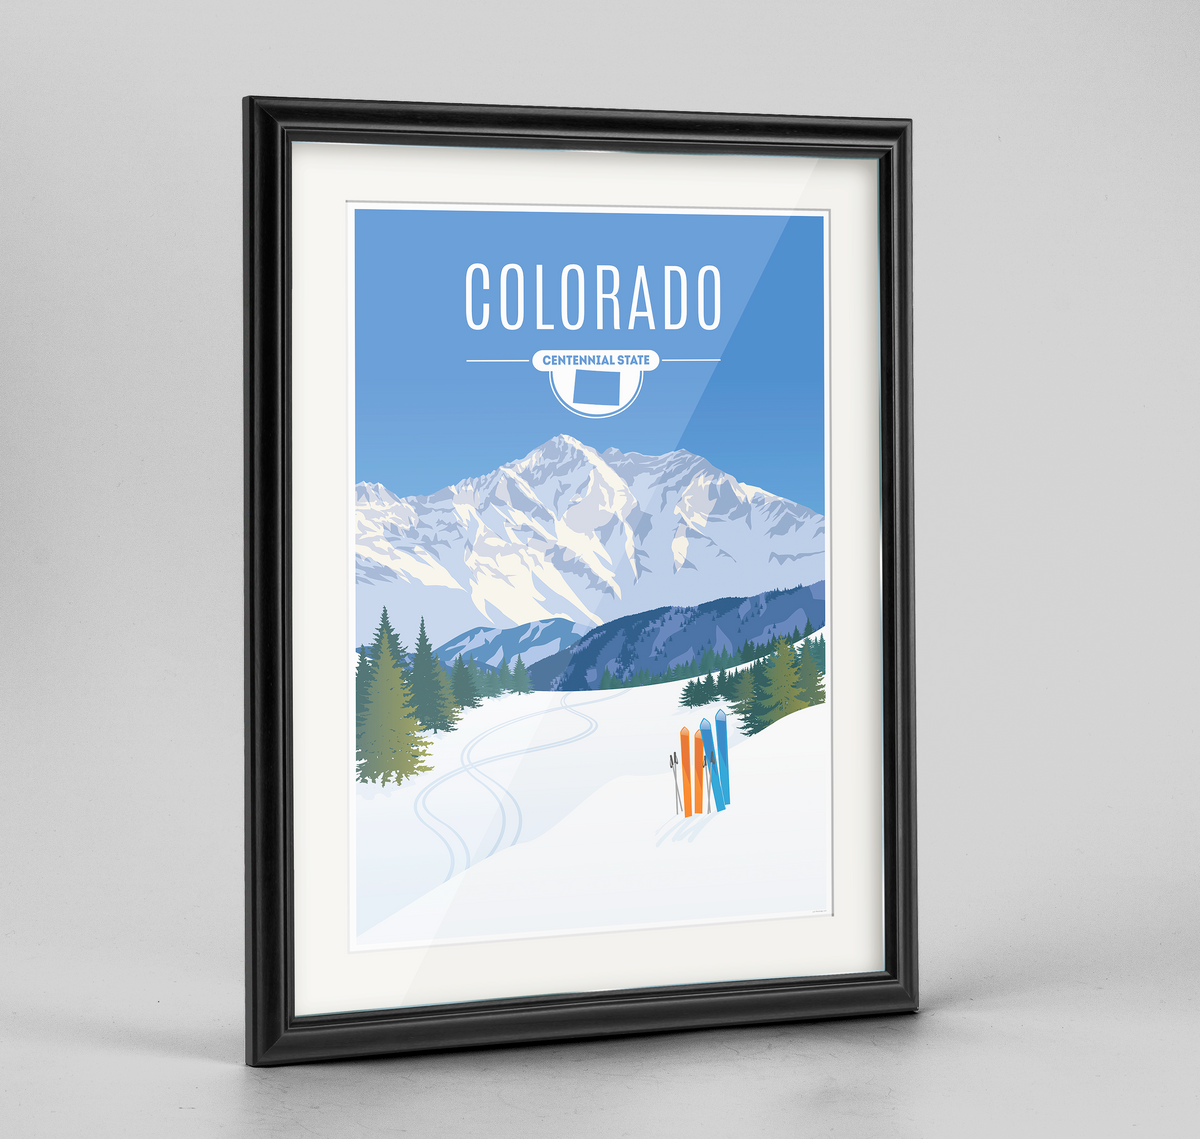 Colorado State Print - Point Two Design